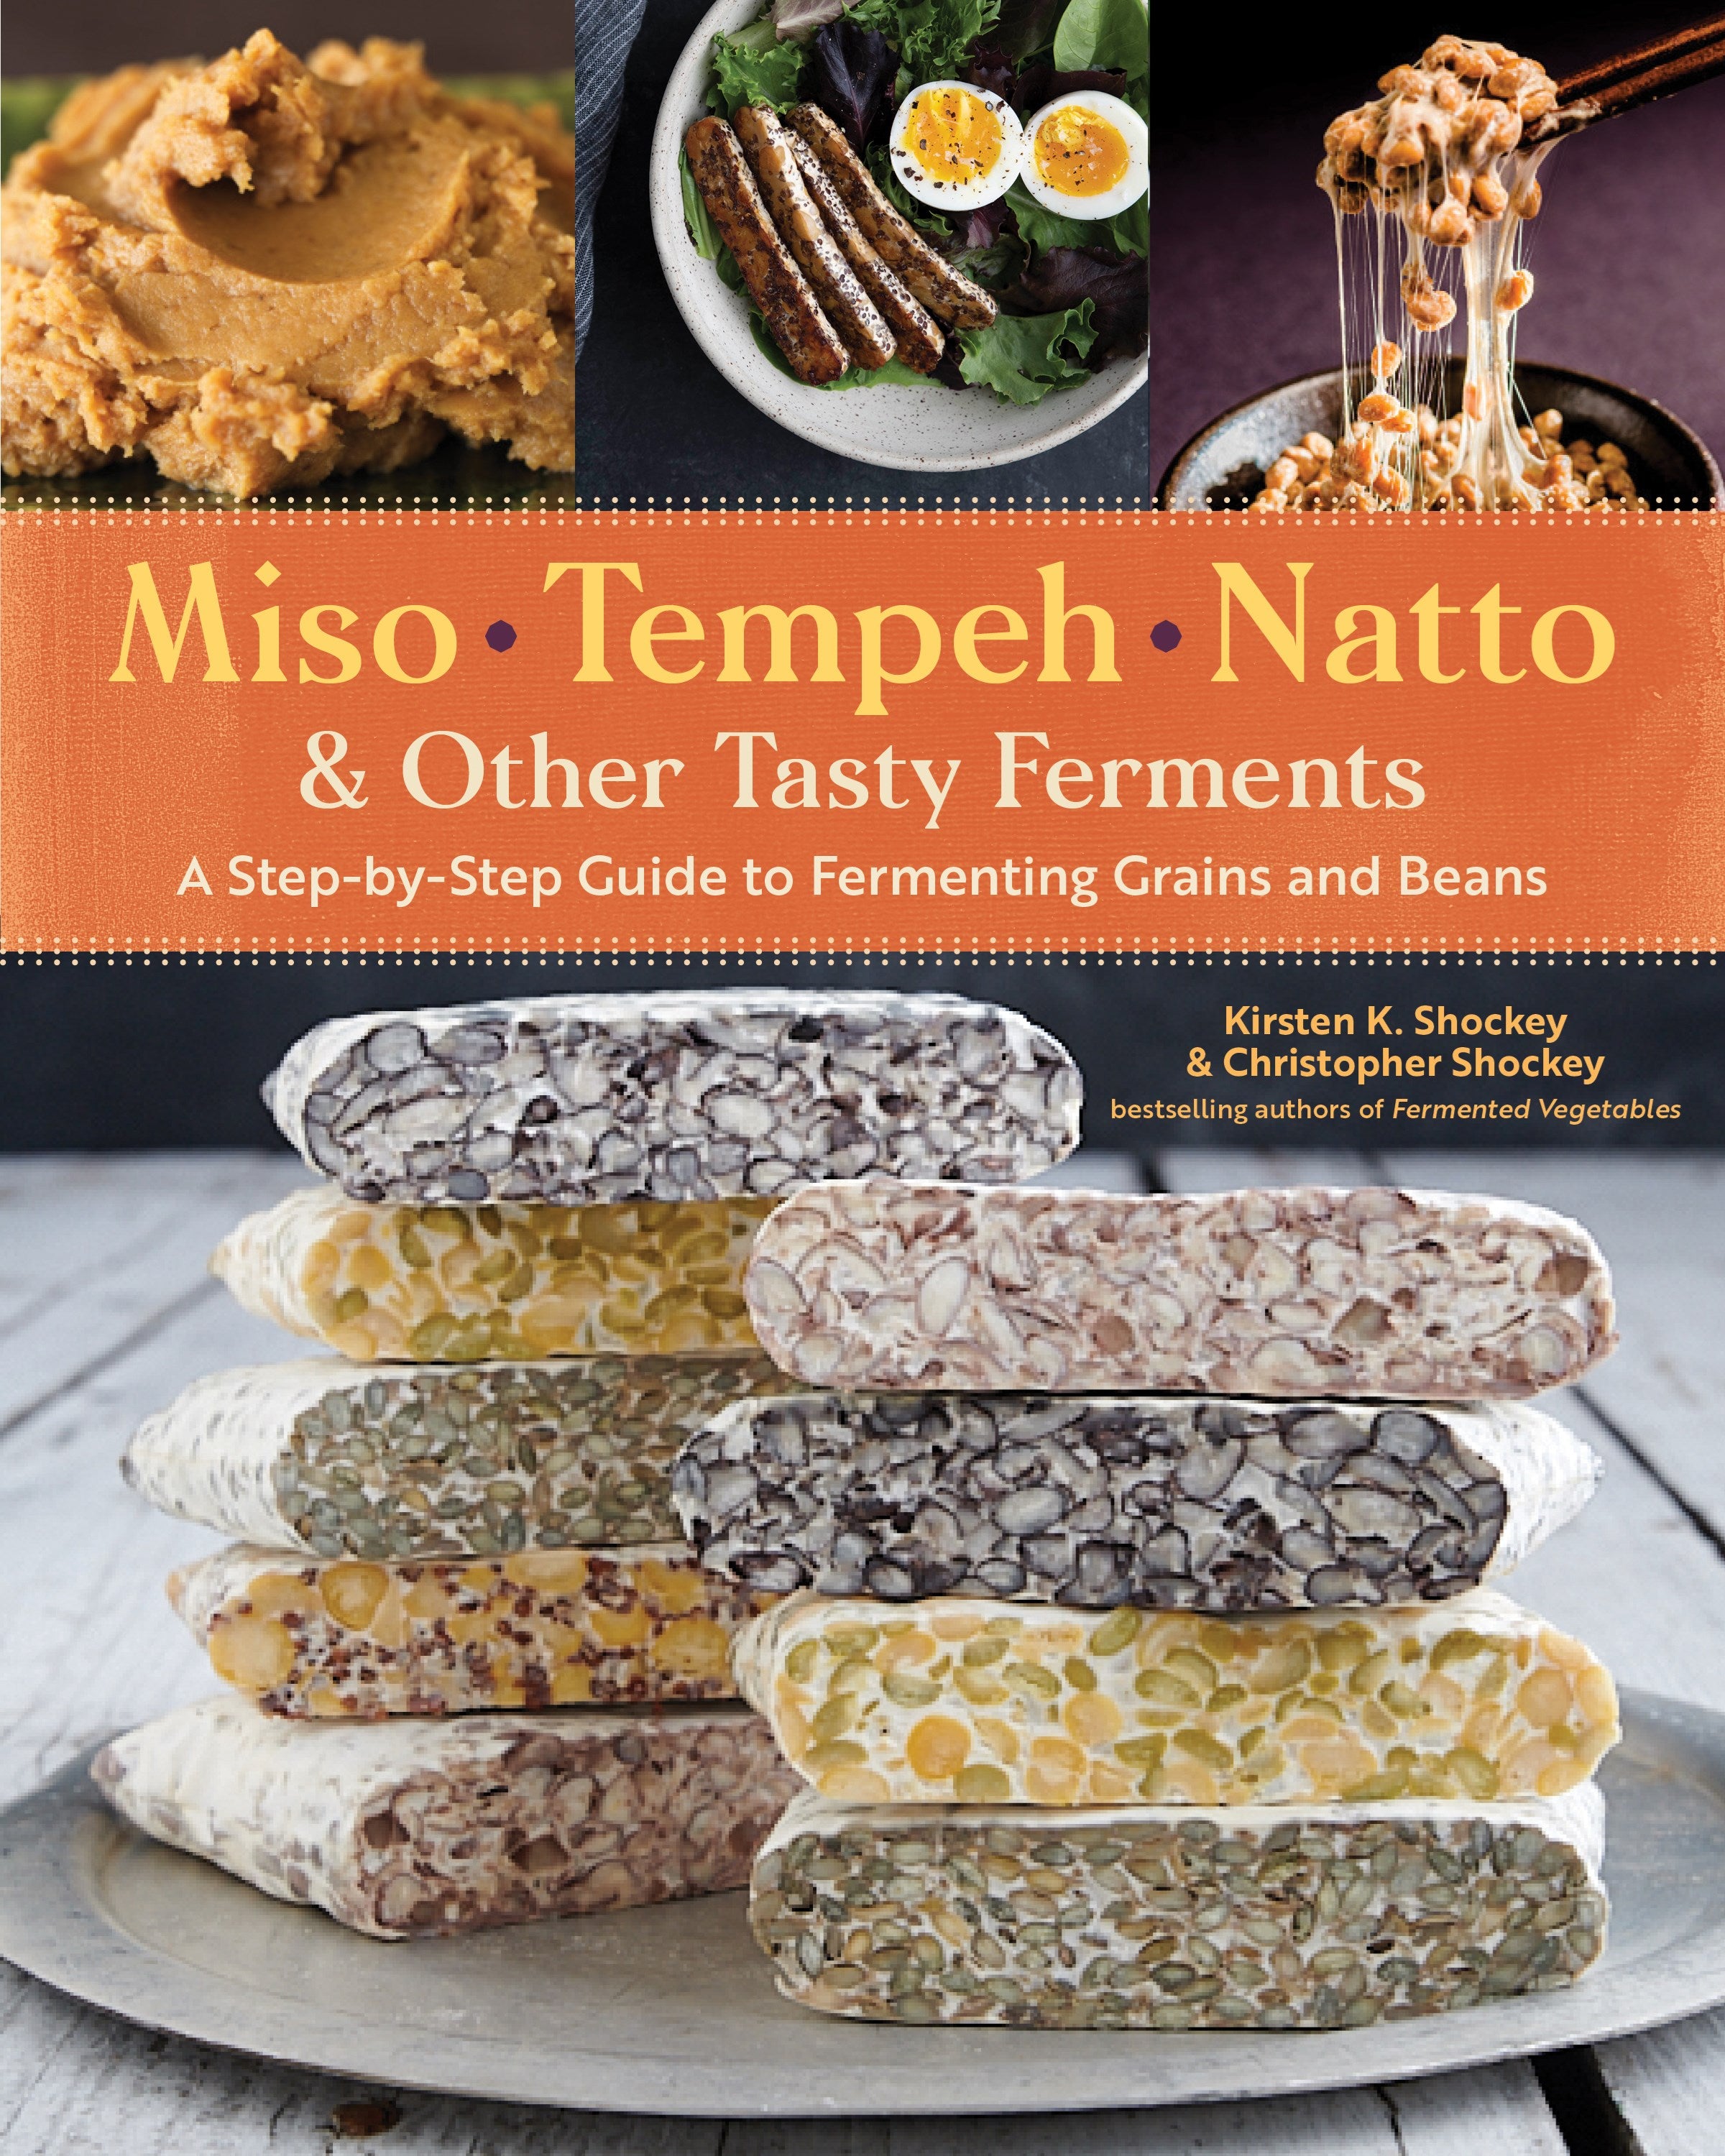 Miso, Tempeh, Natto & Other Tasty Ferments: A Step-by-Step Guide to Fermenting Grains and Beans